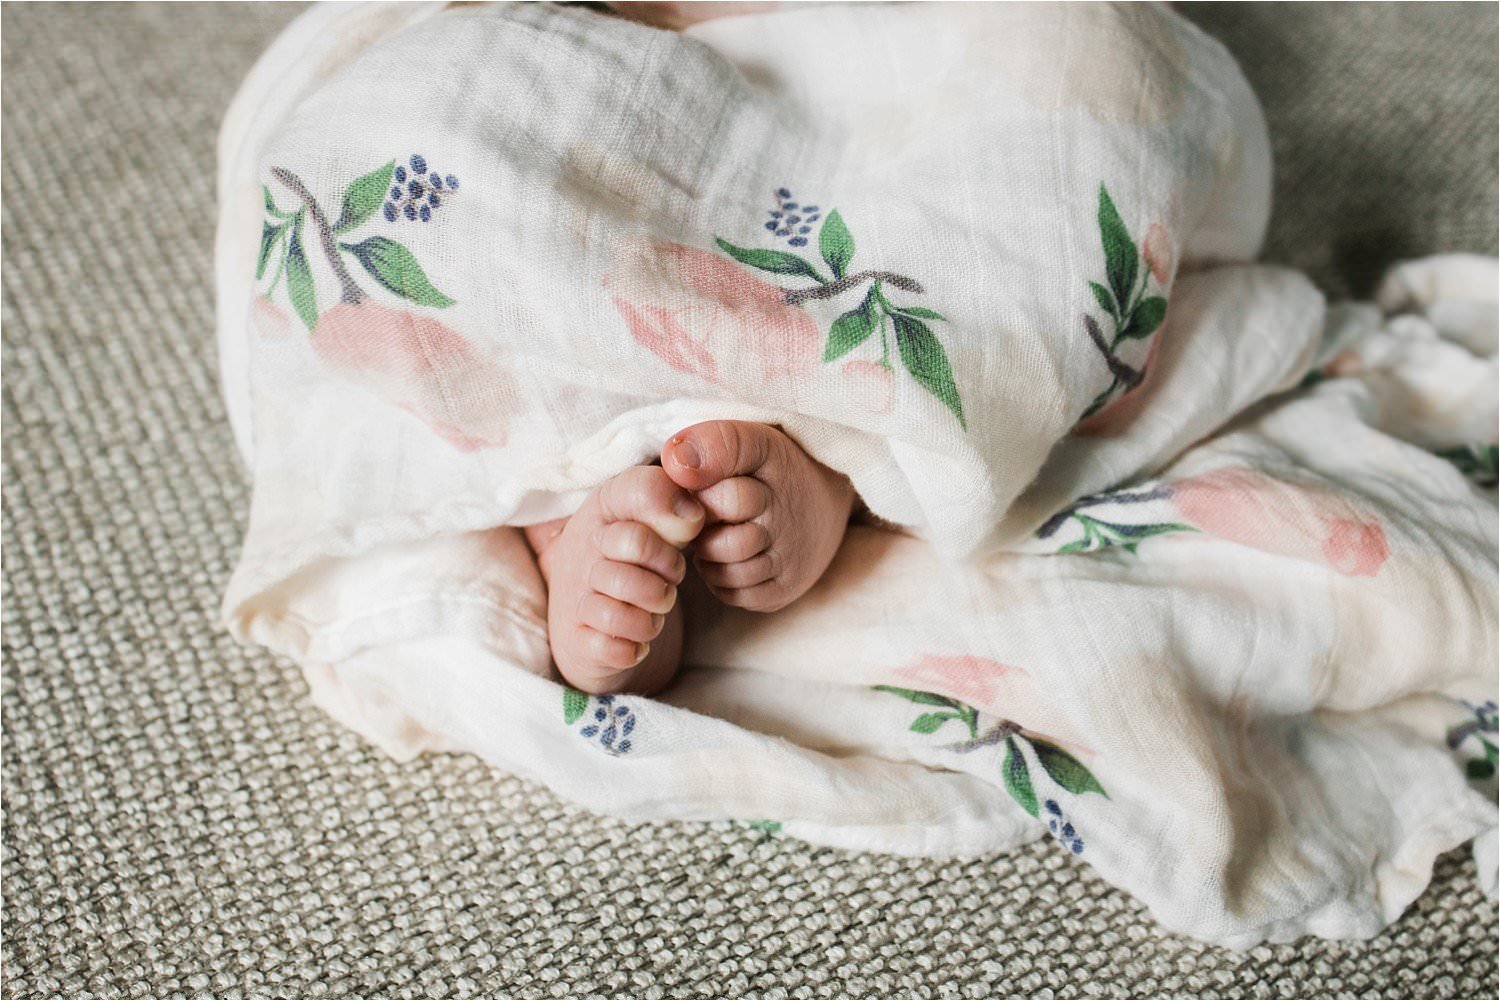 newbron baby toes peeking from a floral swaddle blanket